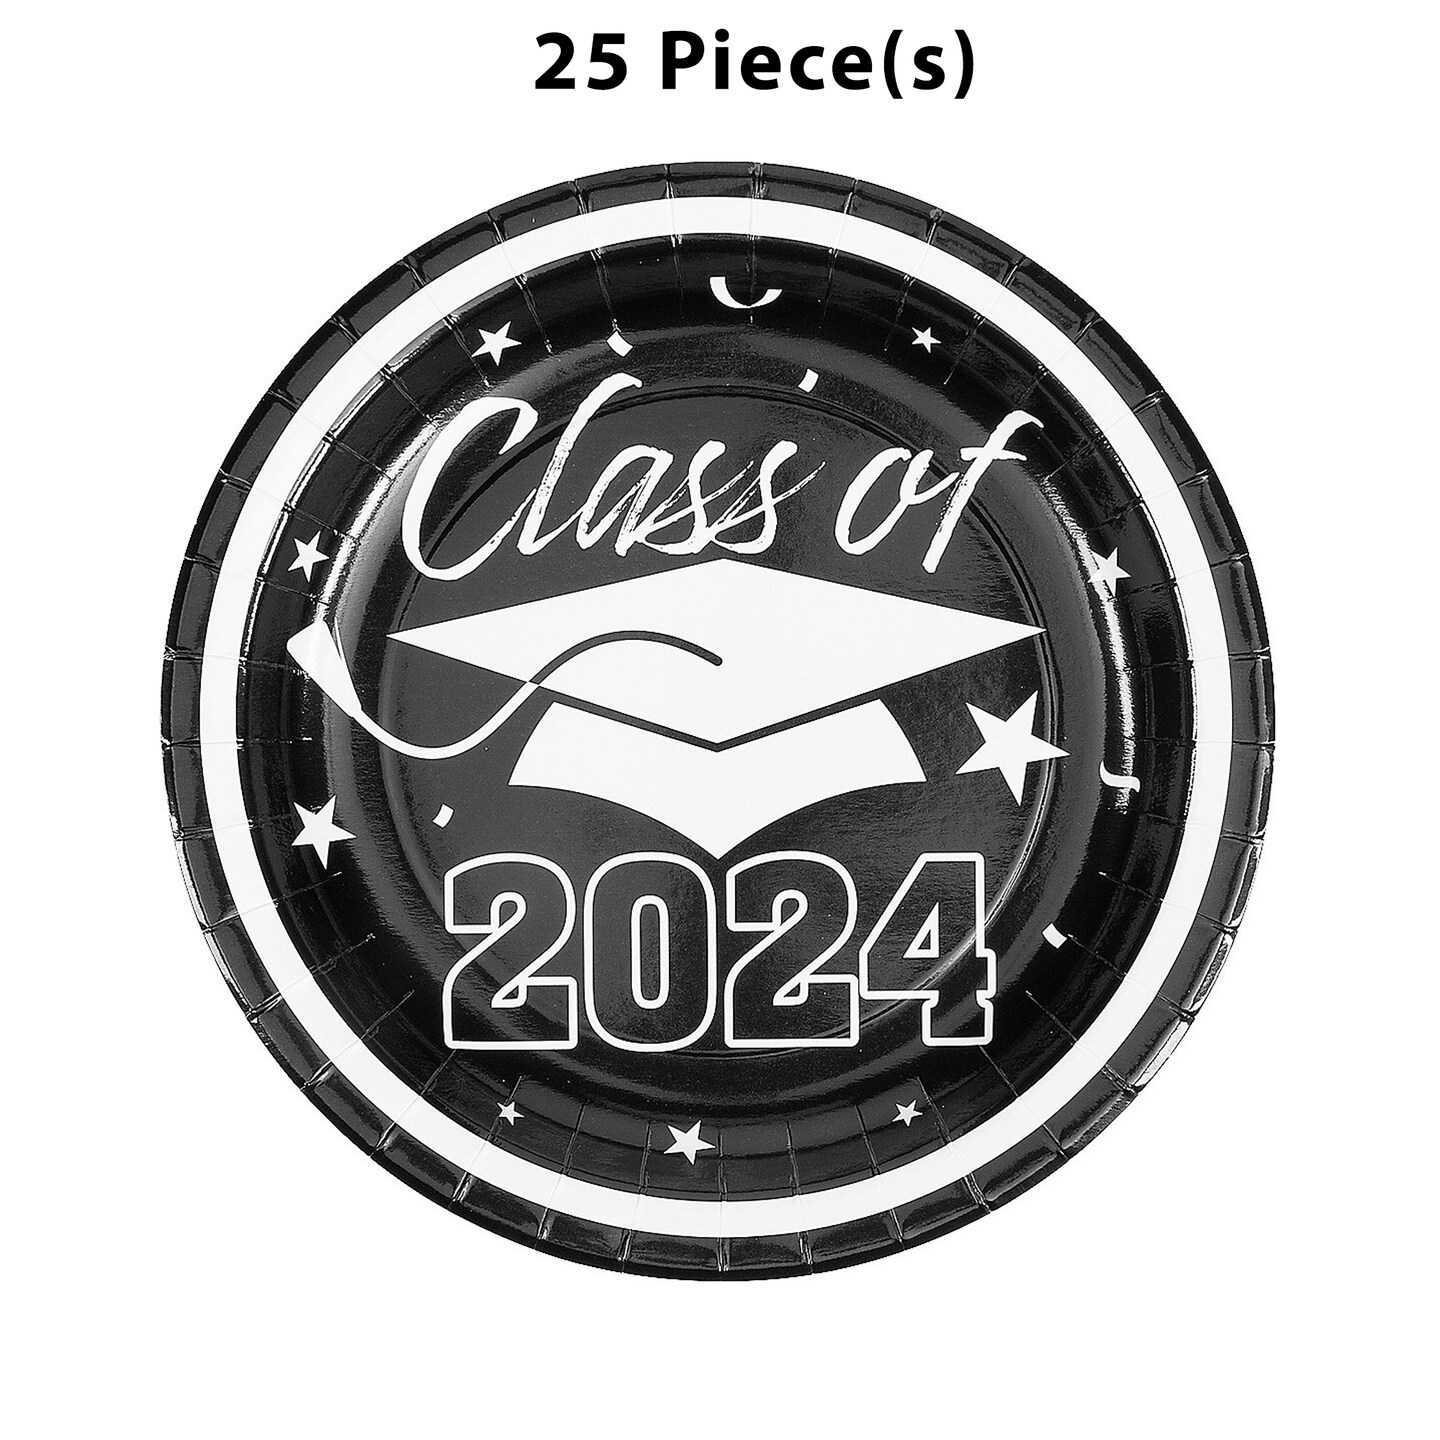 Class of 2024 Black Paper Dinner Plates - 25 Ct.